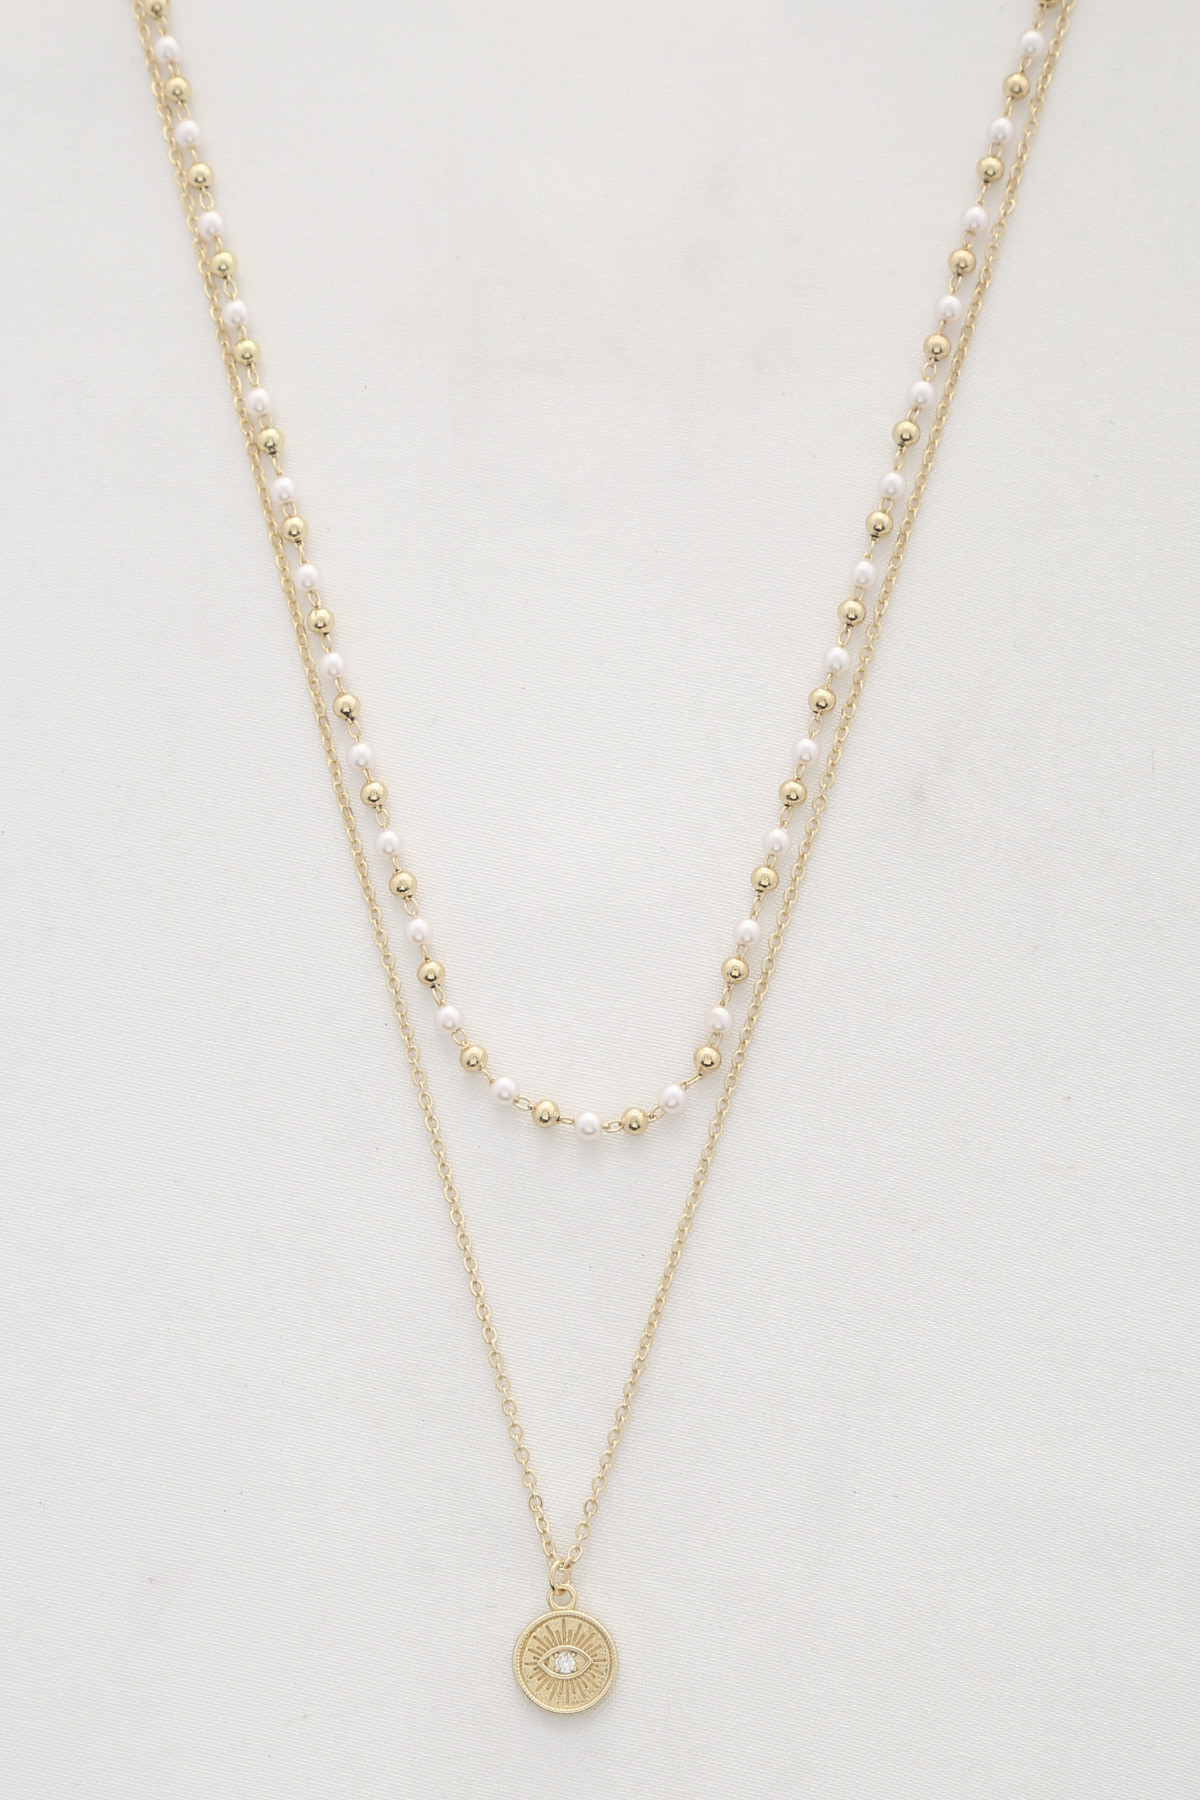 EYE COIN BALL PEARL BEAD LAYERED NECKLACE